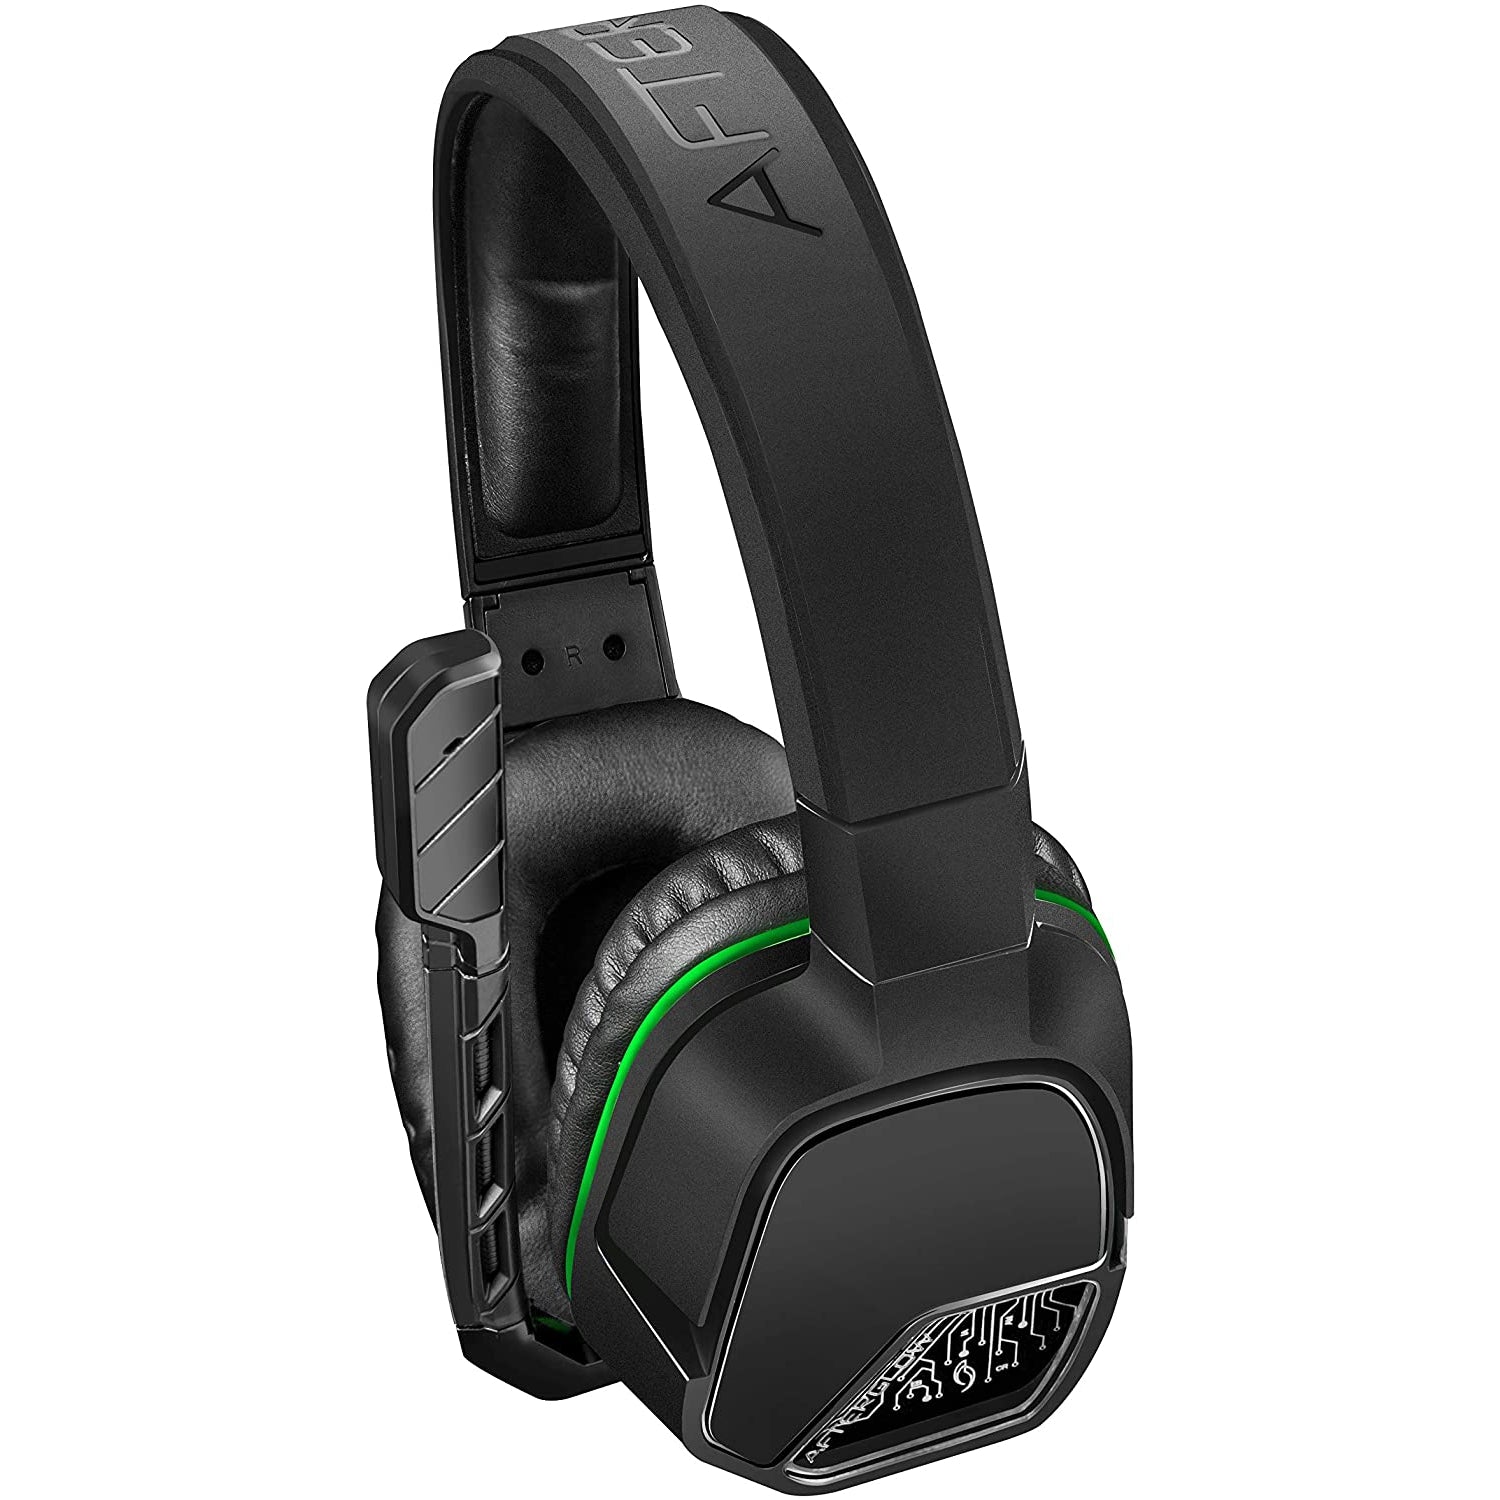 Afterglow LVL 3 Stereo Headset for Xbox One, Black and Green